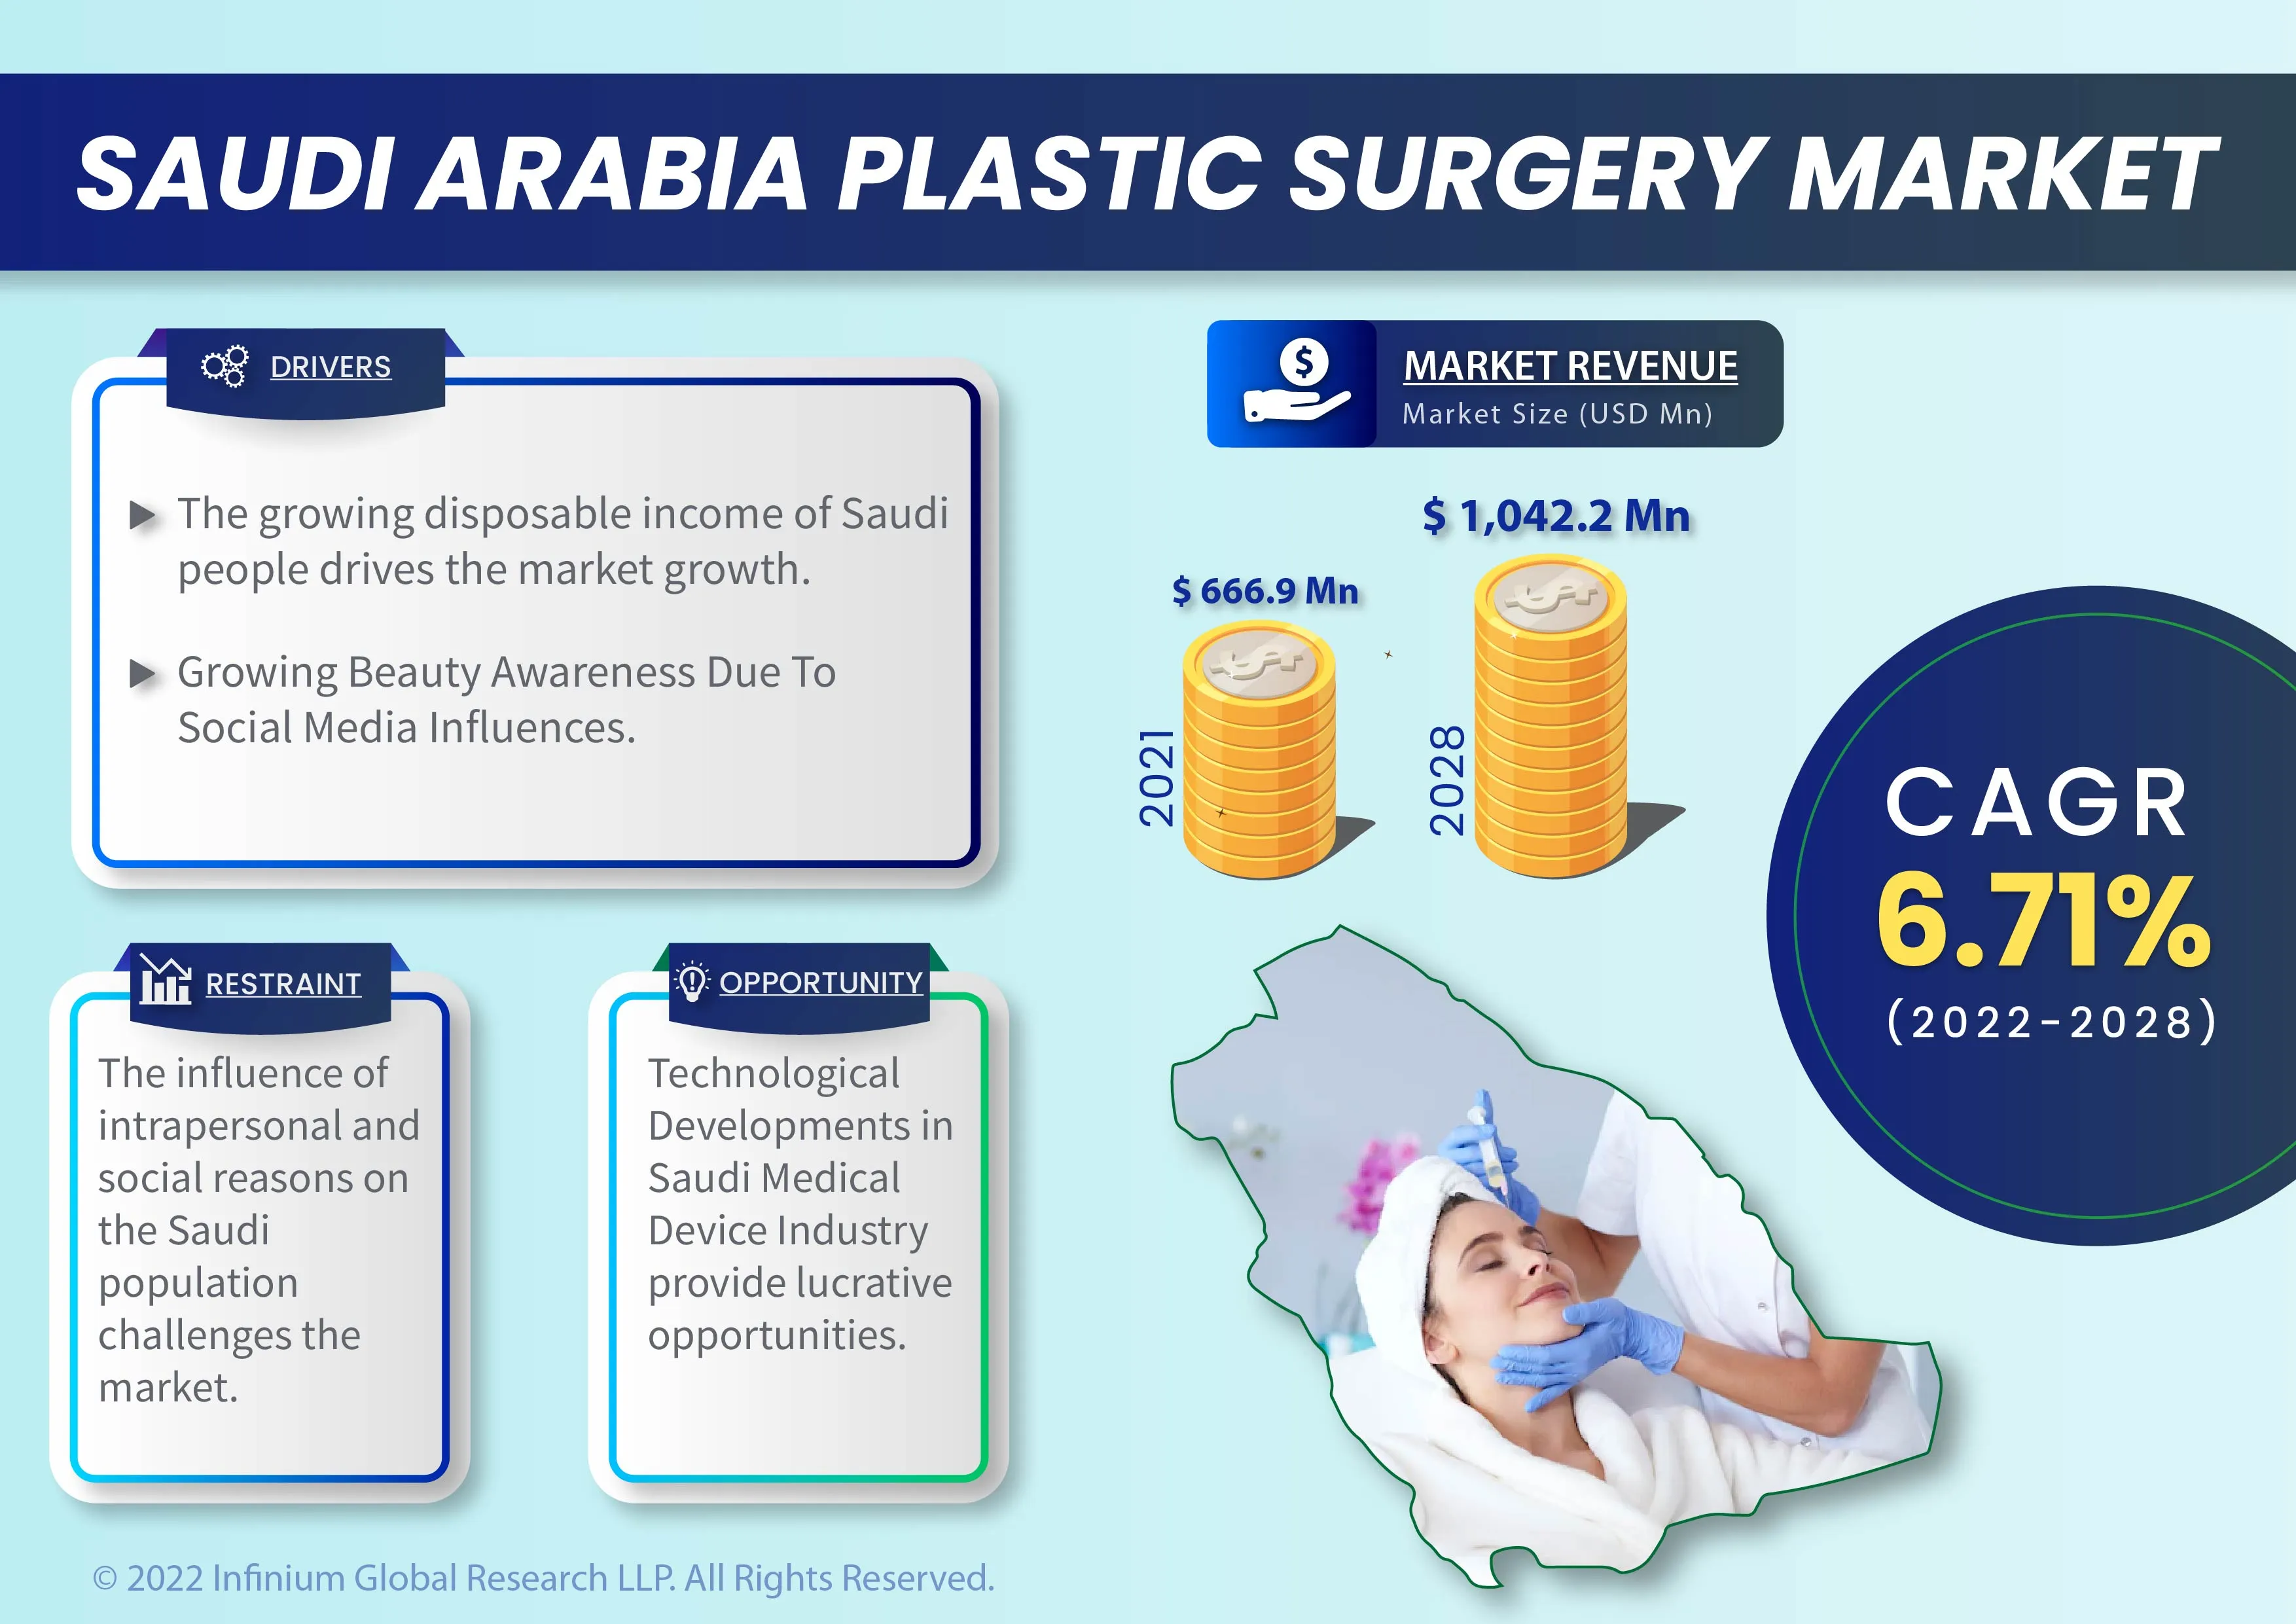 Saudi Arabia Plastic Surgery Market Was Valued at USD 666.9 Million in 2021 and is Expected to Reach USD 1,042.2 Million by 2028 and Grow at a CAGR of 6.71% Over the Forecast Period 2022-2028.